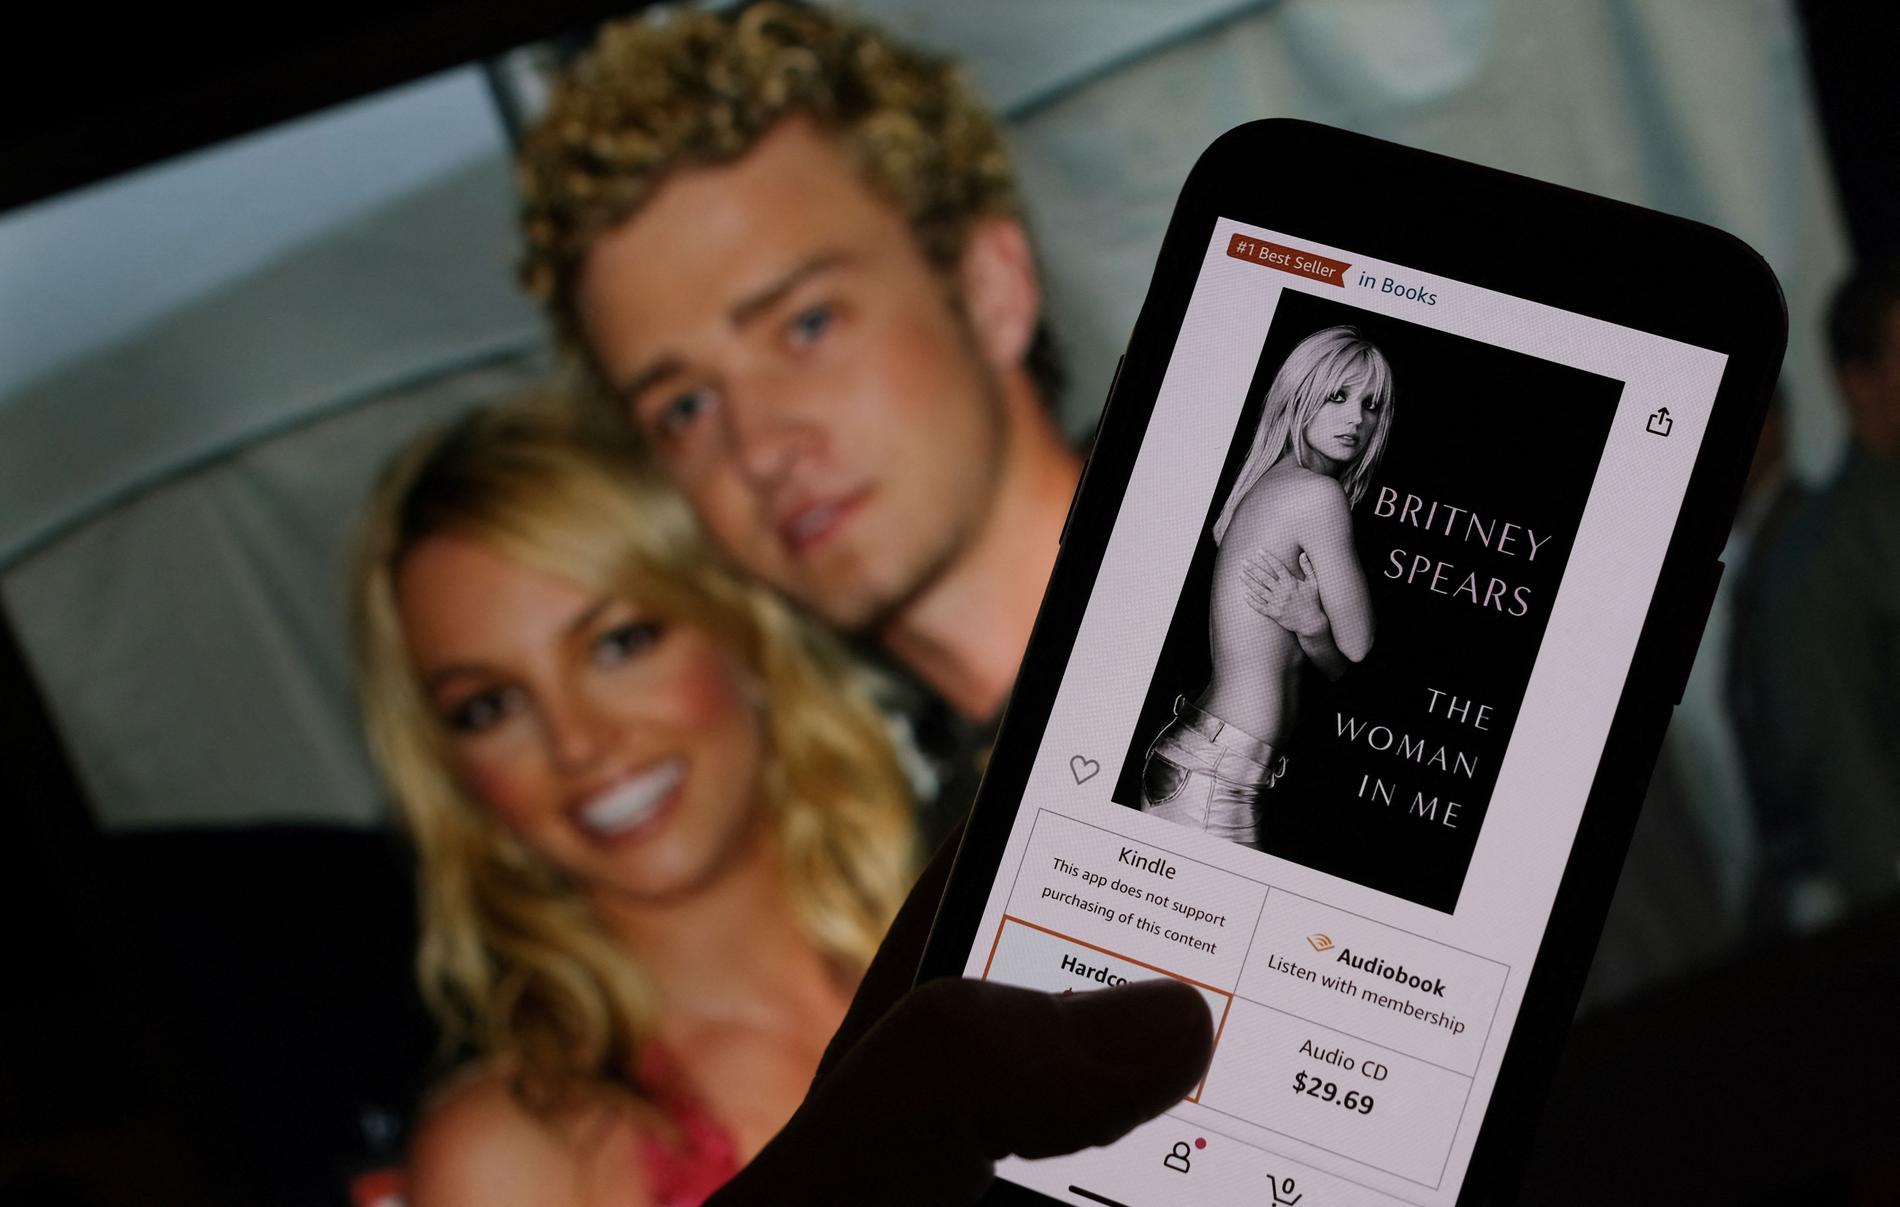 Justin Timberlake shut down the comments section after Britney Spears’ book bombshell